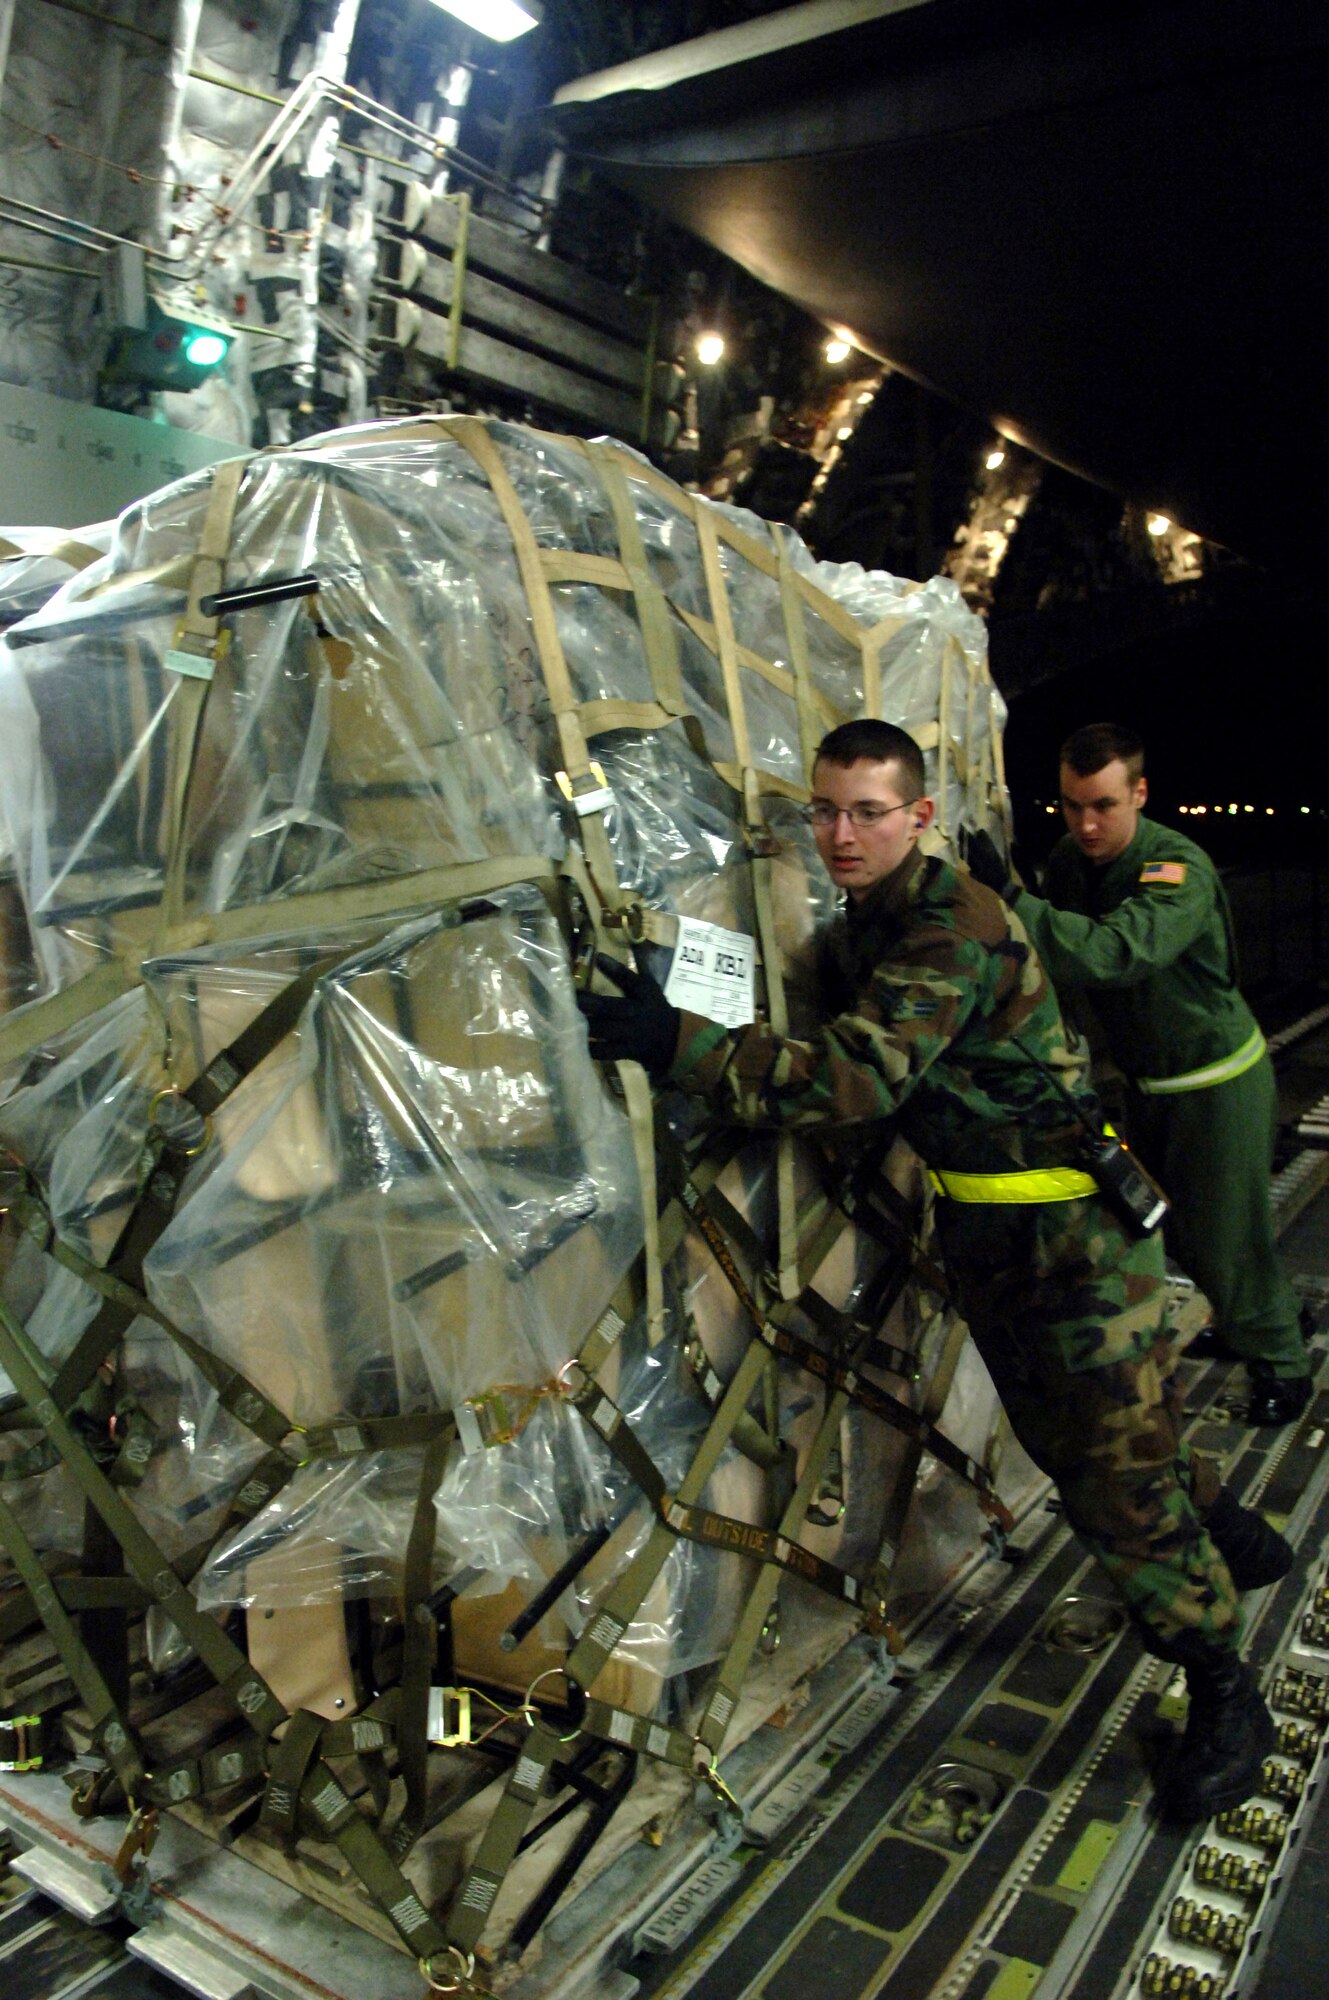 Airman 1st Class Thomas Hickey and Senior Airman Ryan Yarton load cargo on a C-17 Globemaster III Feb. 20 on Incirlik Air Base, Turkey. Turkish and U.S. Air Forces' joint effort provided 94,000 pounds of supplies and equipment for the Afghan army to use in the war on terrorism. The Airmen are assigned to the 728th Air Mobility Squadron. (U.S. Air Force photo/Airman 1st Class Nathan W. Lipscomb)